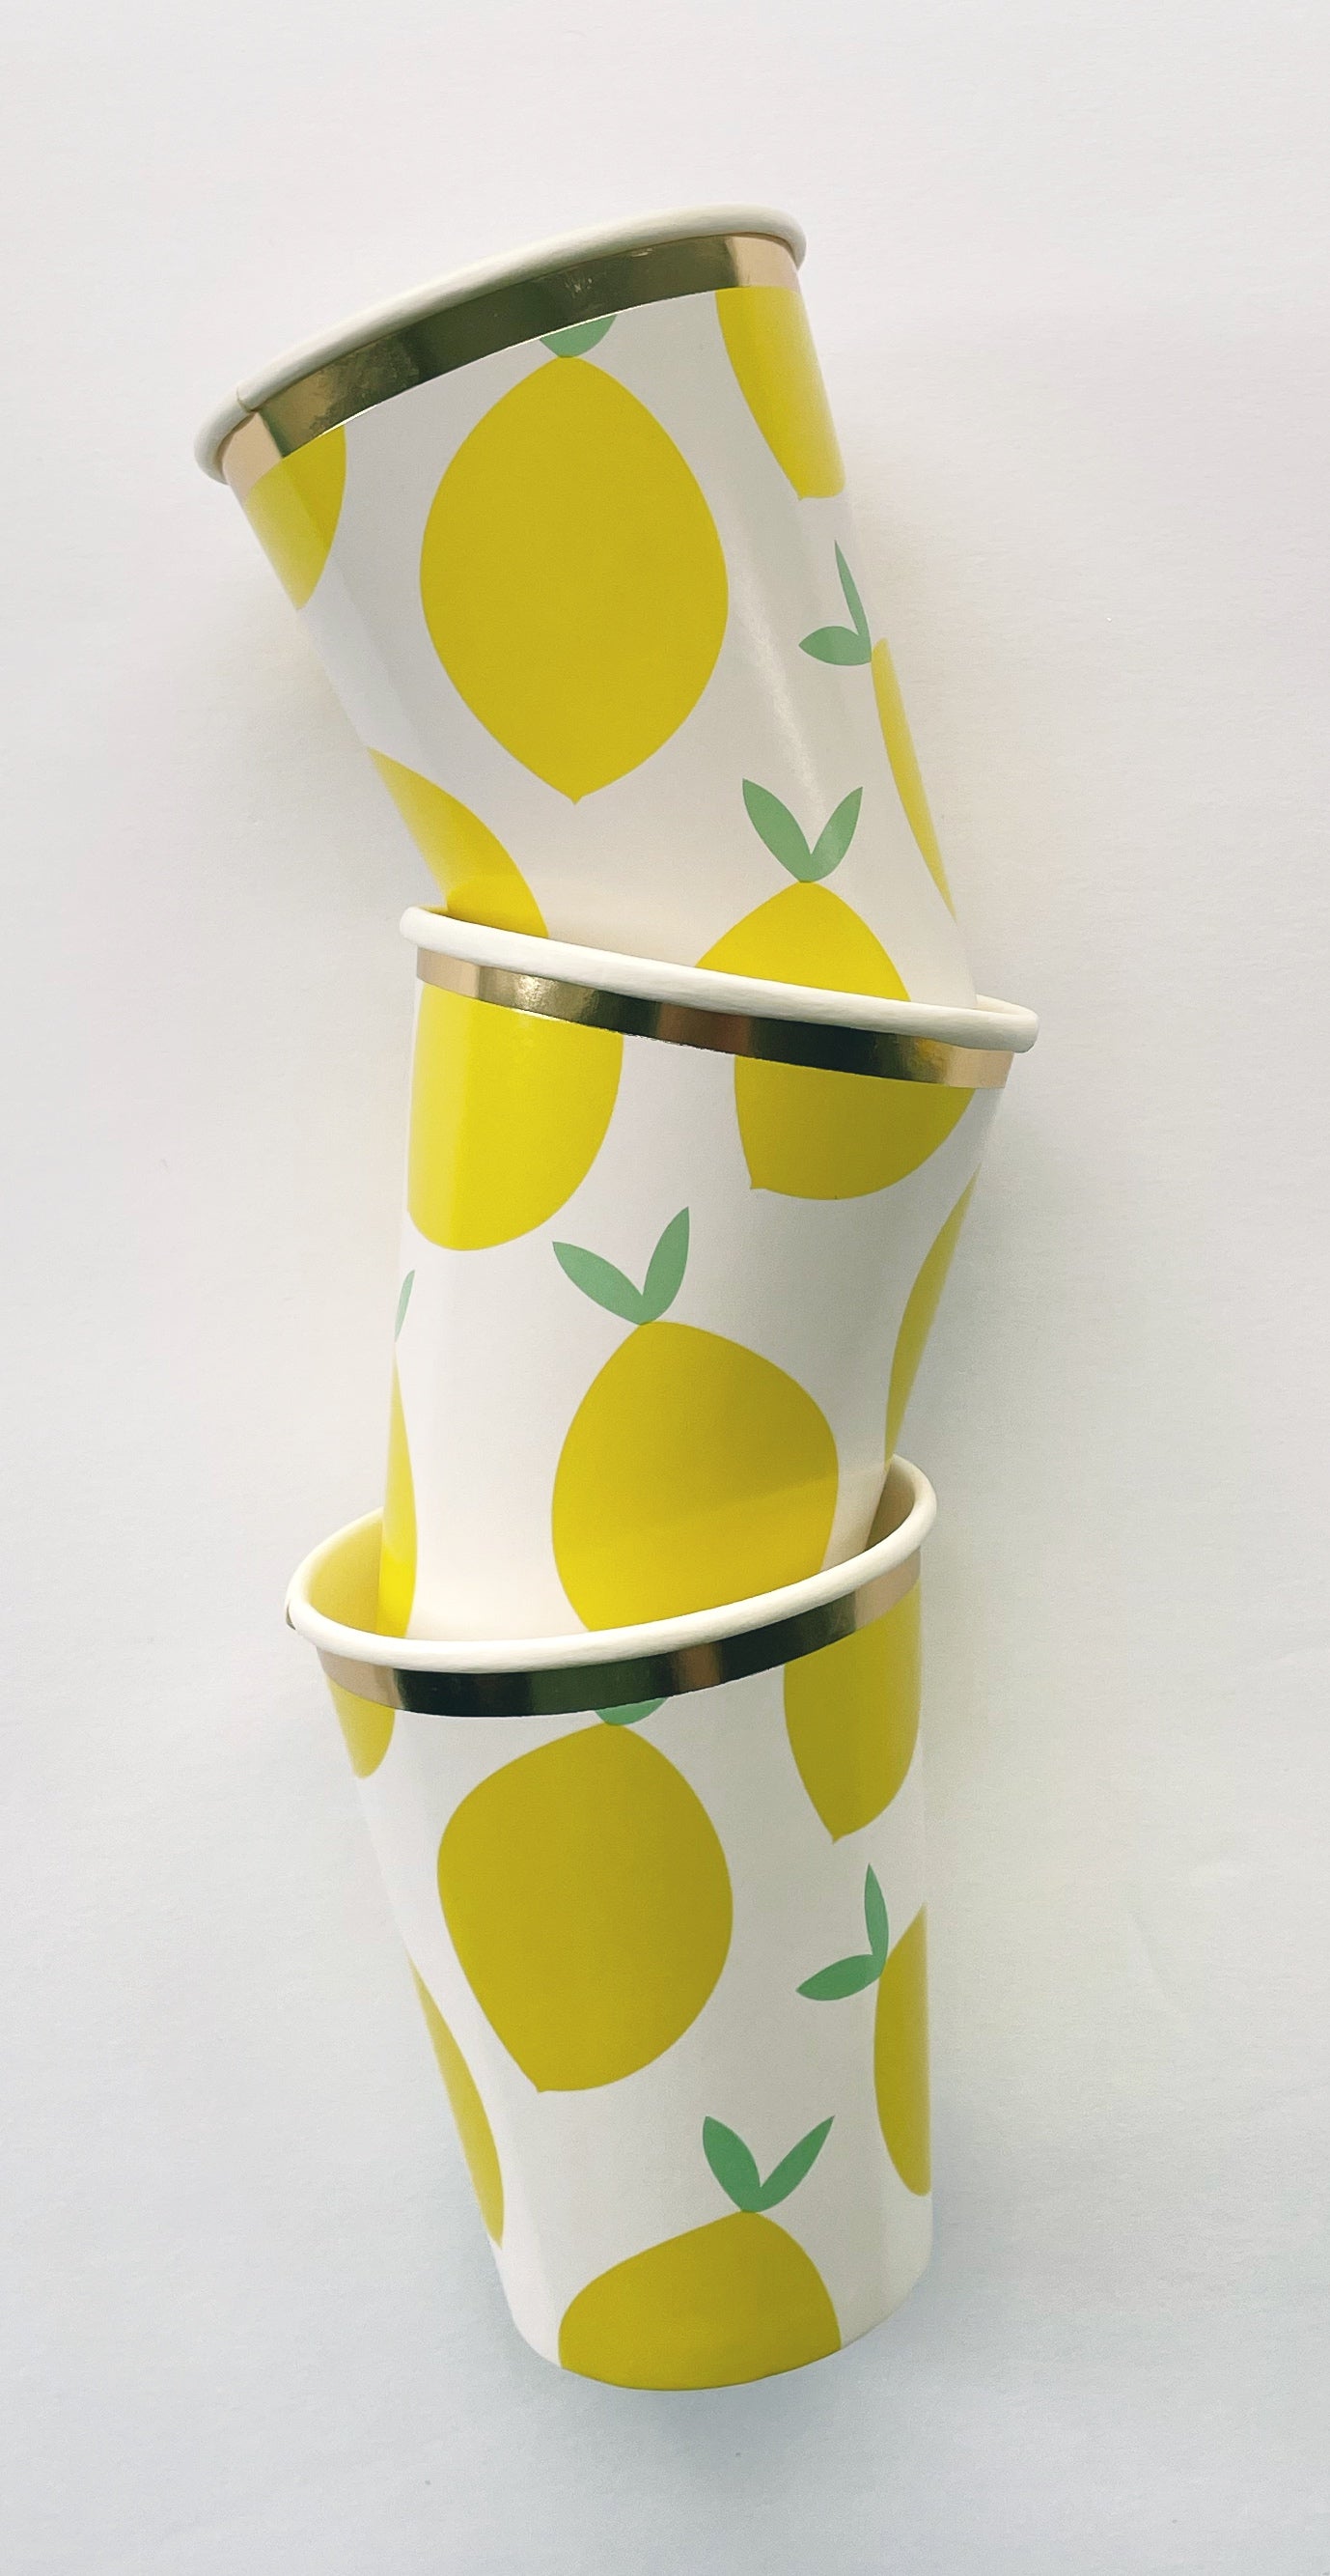 Lemon Party Kit paper party cups. The lemon pattern includes yellow, green and white colours with a metallic gold trim.